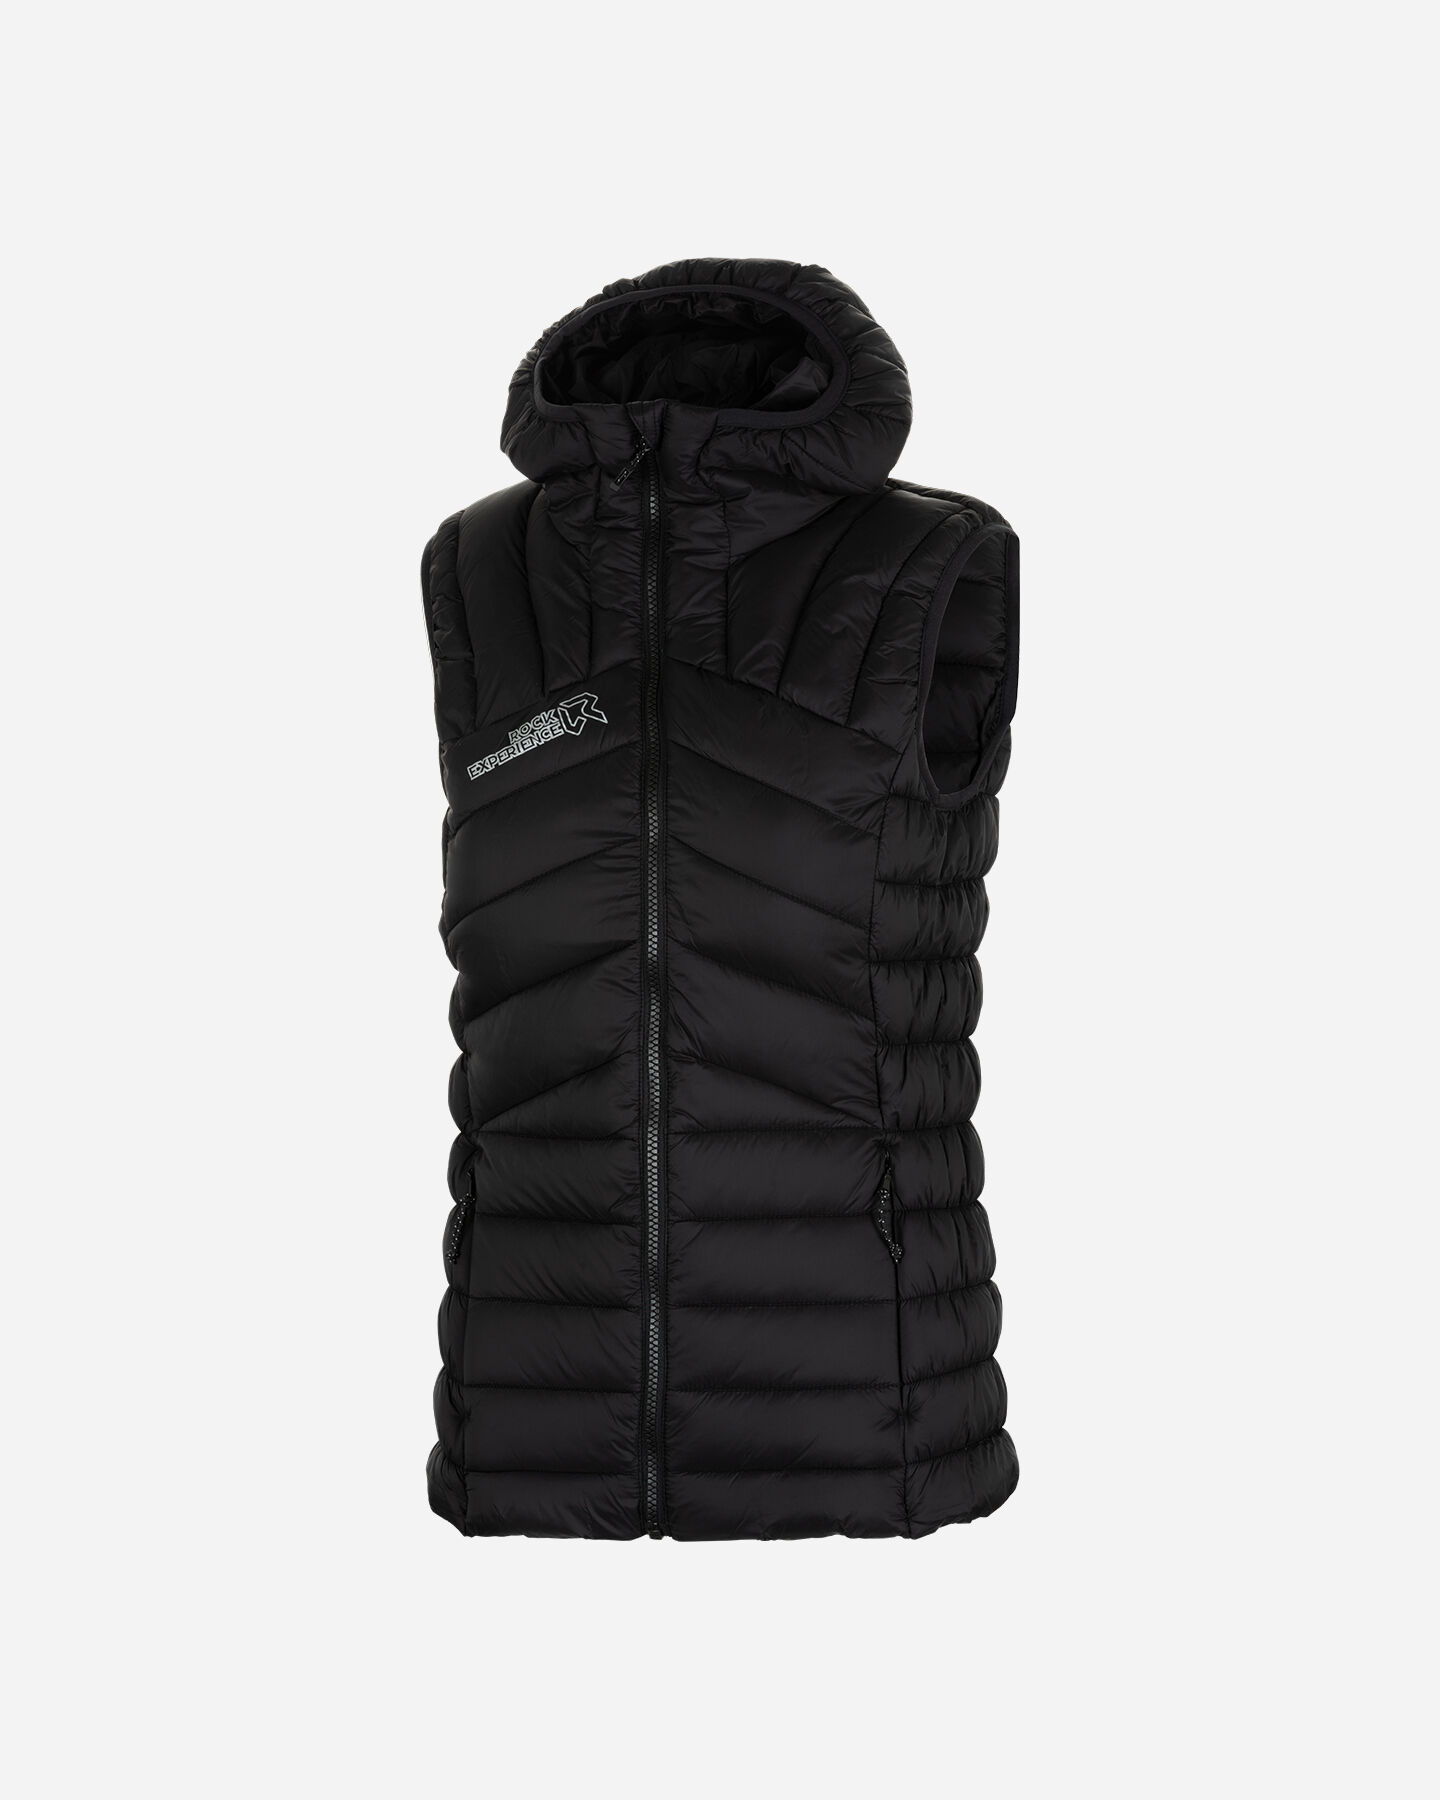  Gilet ROCK EXPERIENCE RE COSMIC 2.0 W S4115529|0208|S scatto 0